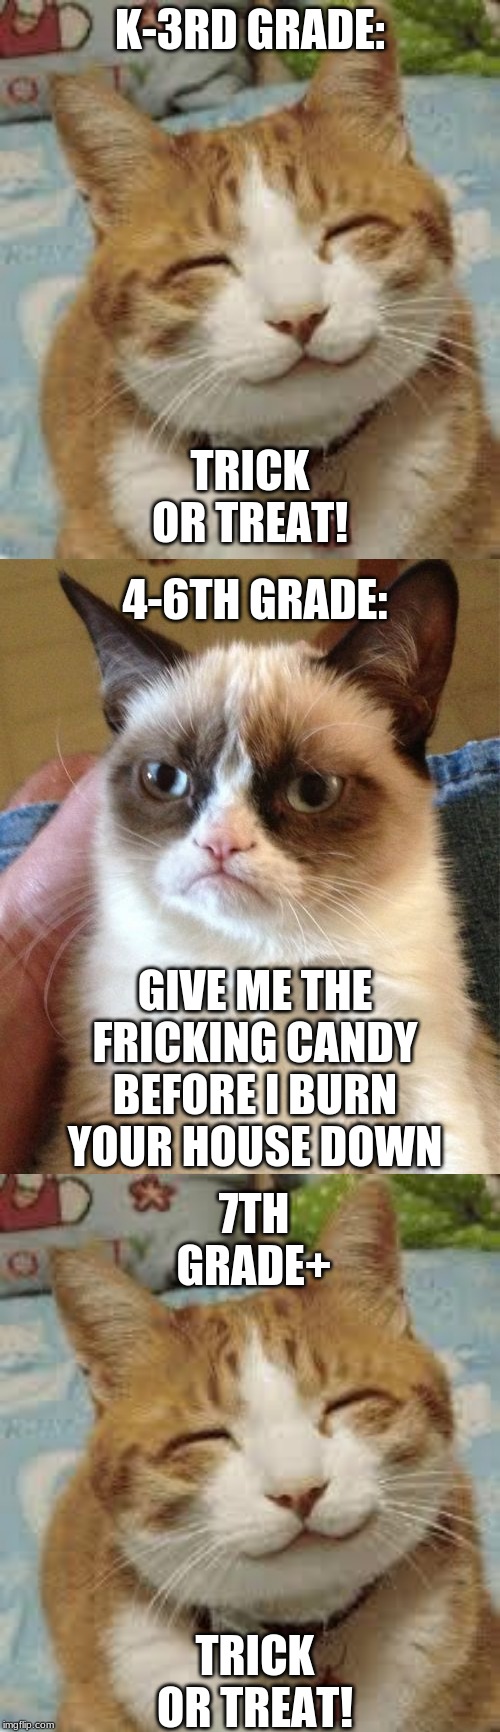 Ah, trick or treating! | K-3RD GRADE:; TRICK OR TREAT! 4-6TH GRADE:; GIVE ME THE FRICKING CANDY BEFORE I BURN YOUR HOUSE DOWN; 7TH GRADE+; TRICK OR TREAT! | image tagged in memes,grumpy cat,happy cat,trick or treat,halloween | made w/ Imgflip meme maker